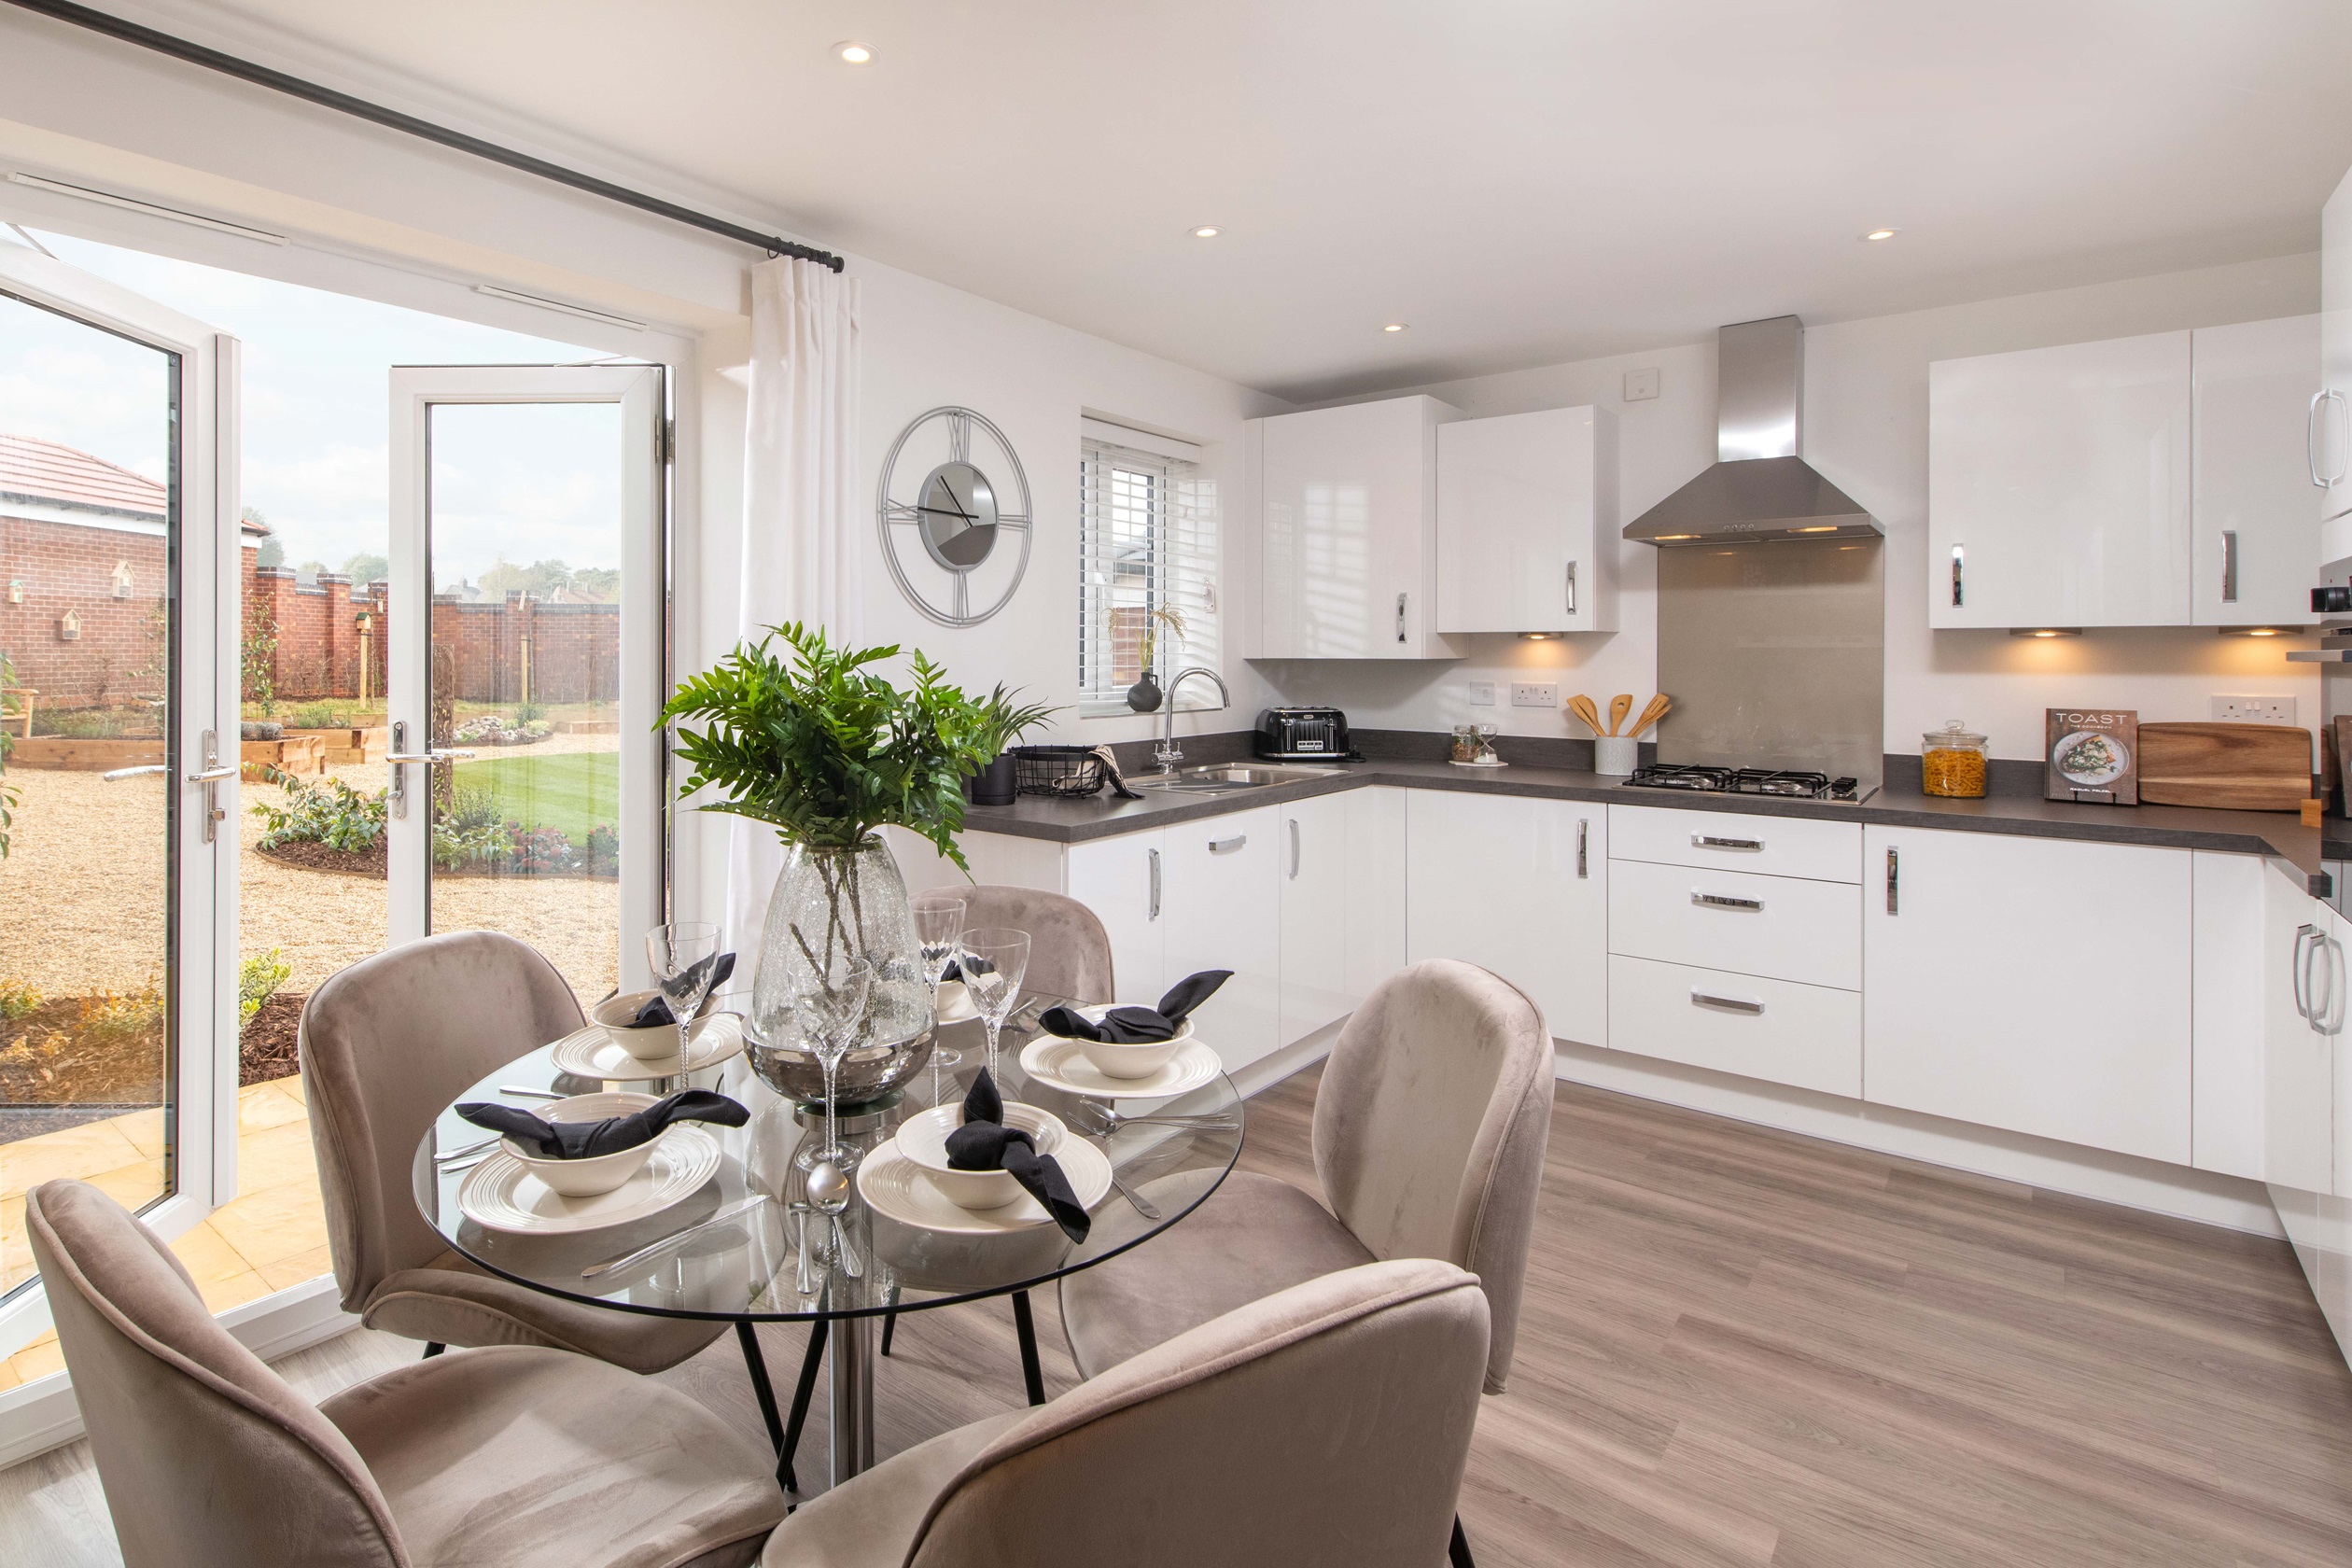 Property 3 of 10. Dwh Kennett Kitchen-Diner With French Doors